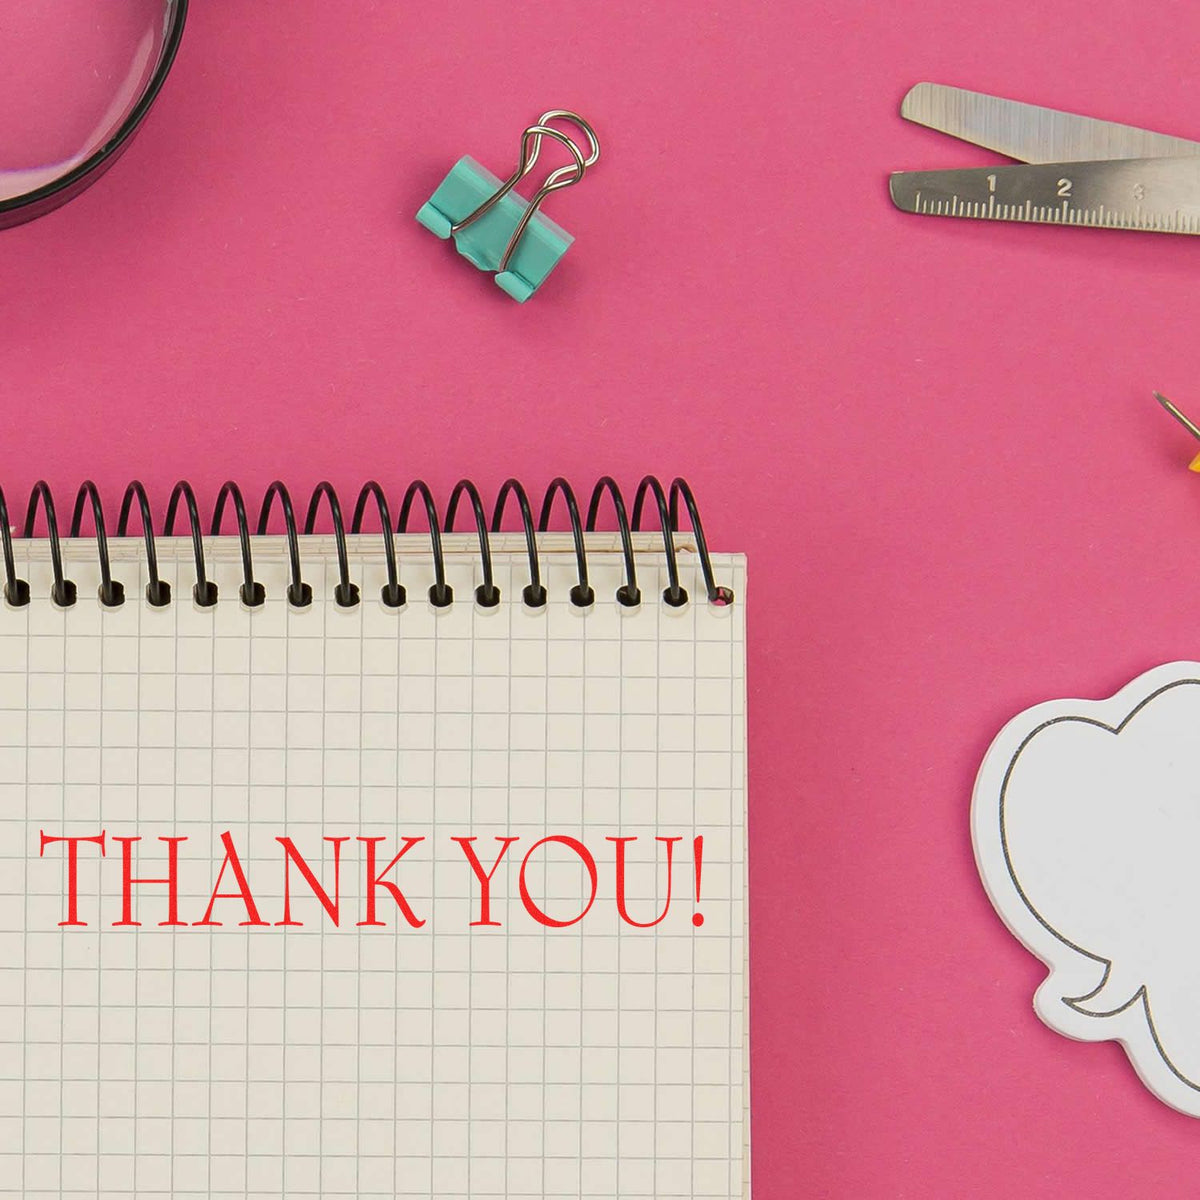 Thank You Rubber Stamp In Use Photo